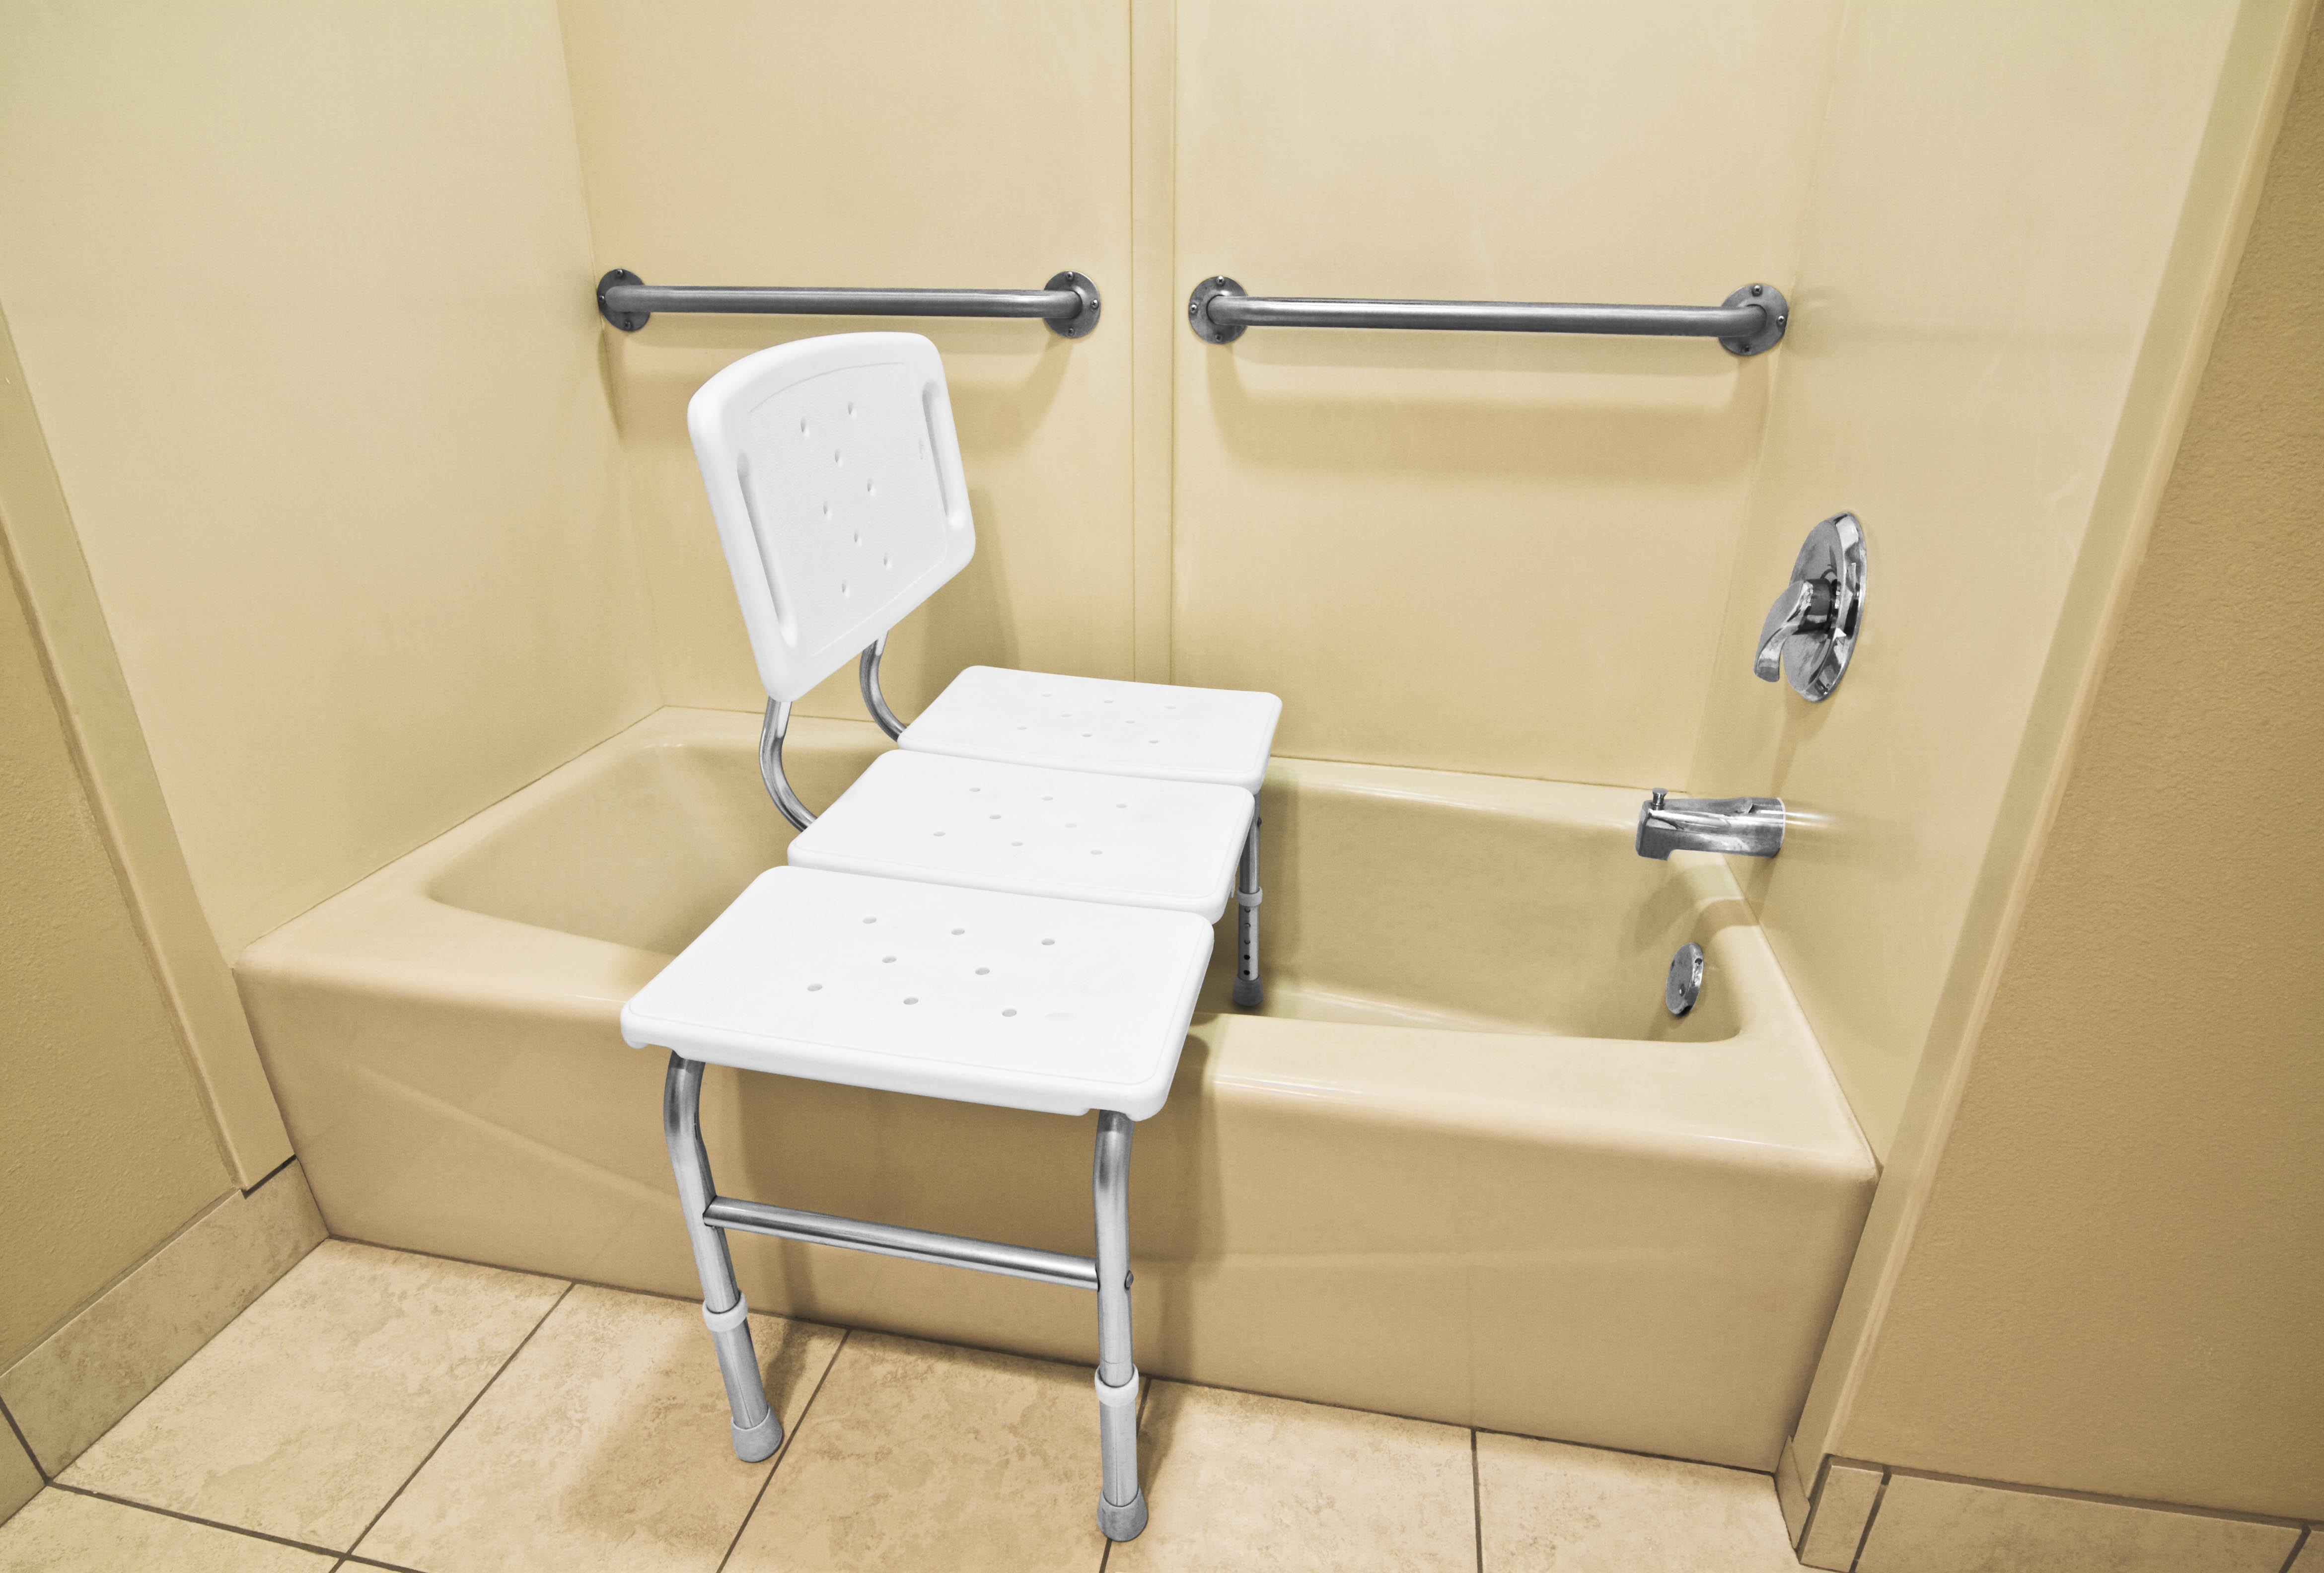 Chairs for the shower for the disabled